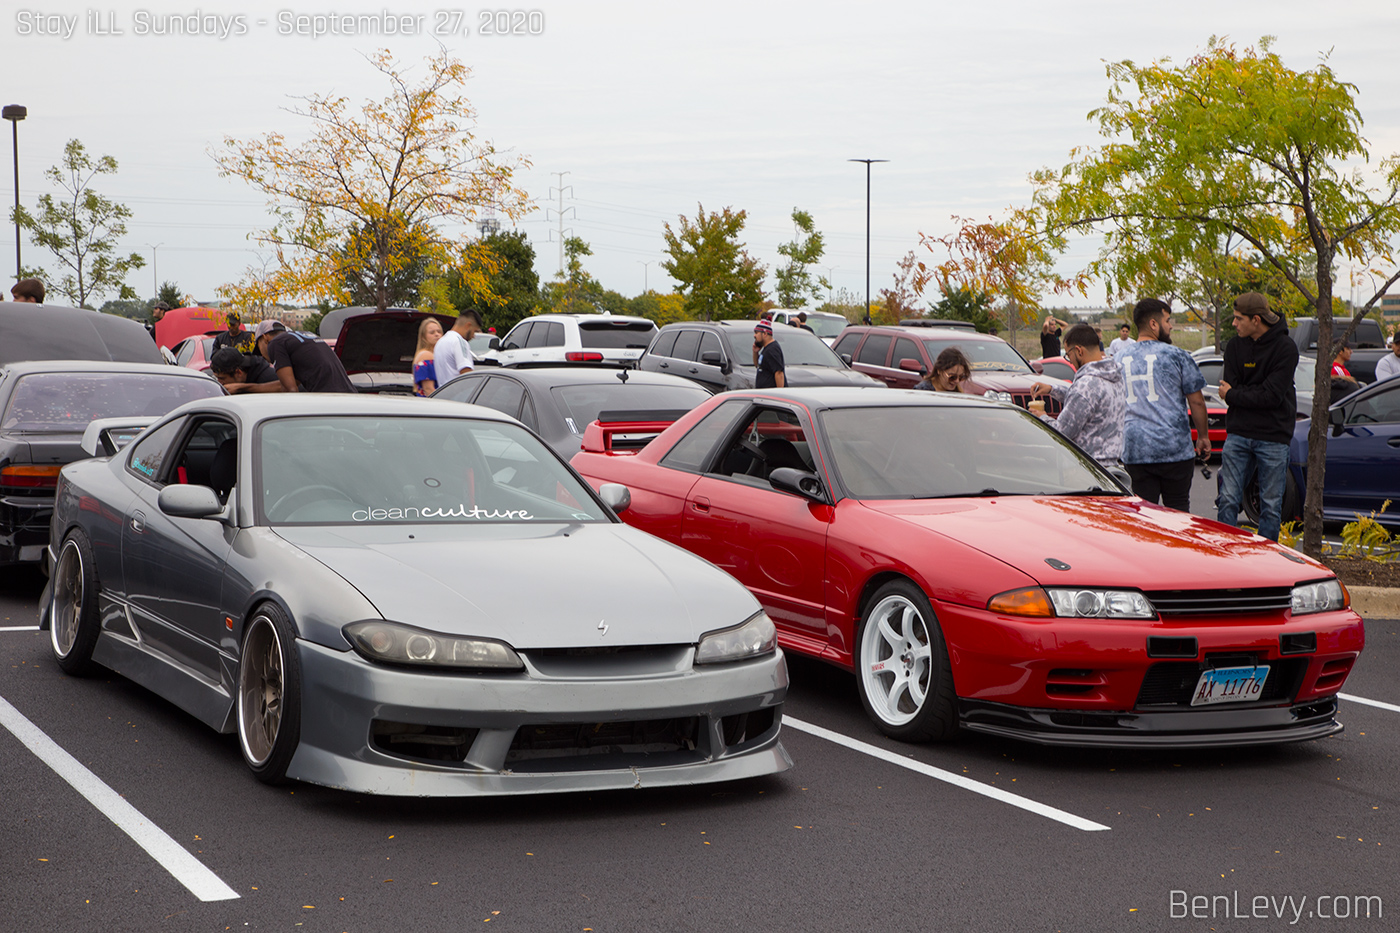 Silver S15 Silvia and Red R32 Skyline